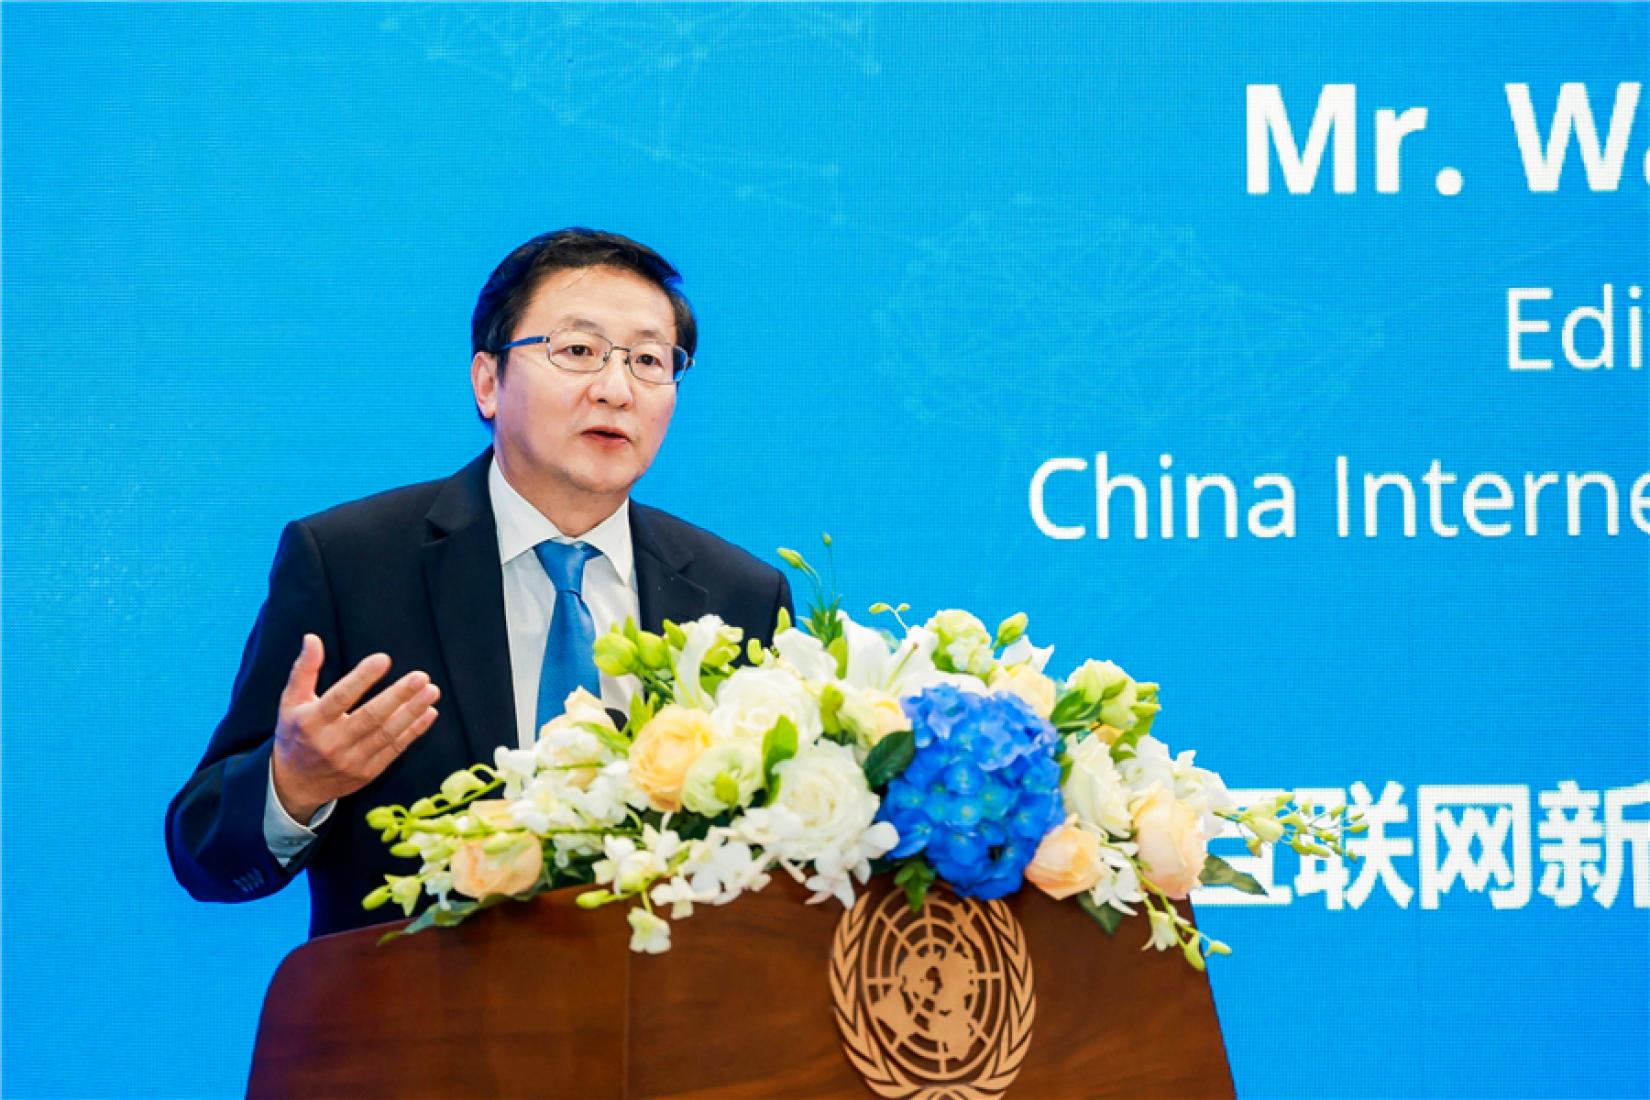 Wang Xiaohui, Editor-in-Chief of CIIC, delivers a speech at the South-South Cooperation Knowledge Sharing Forum